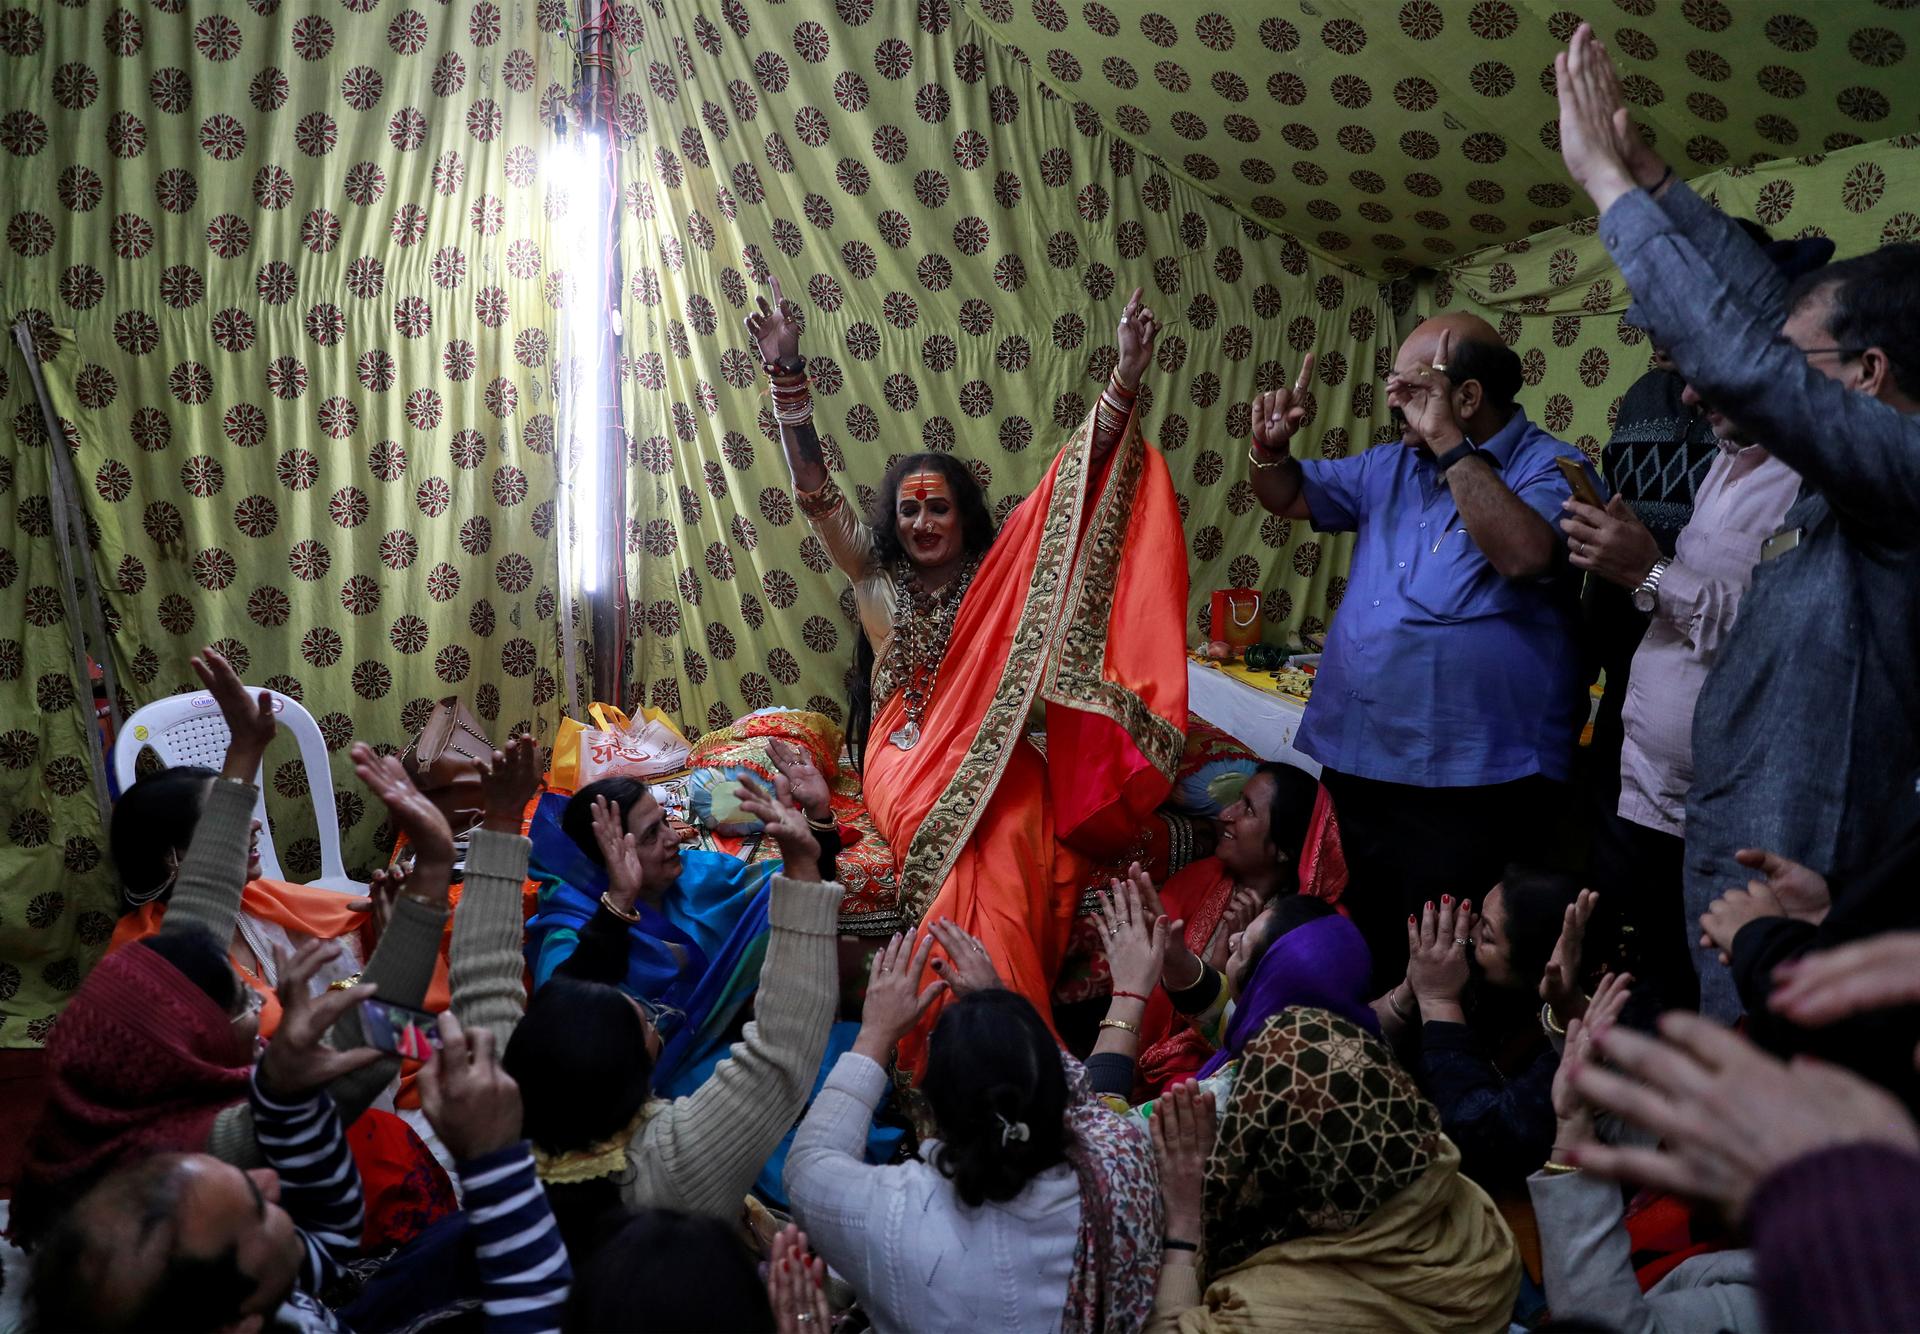 A transgender Indian woman in front of a crowd with hands raised